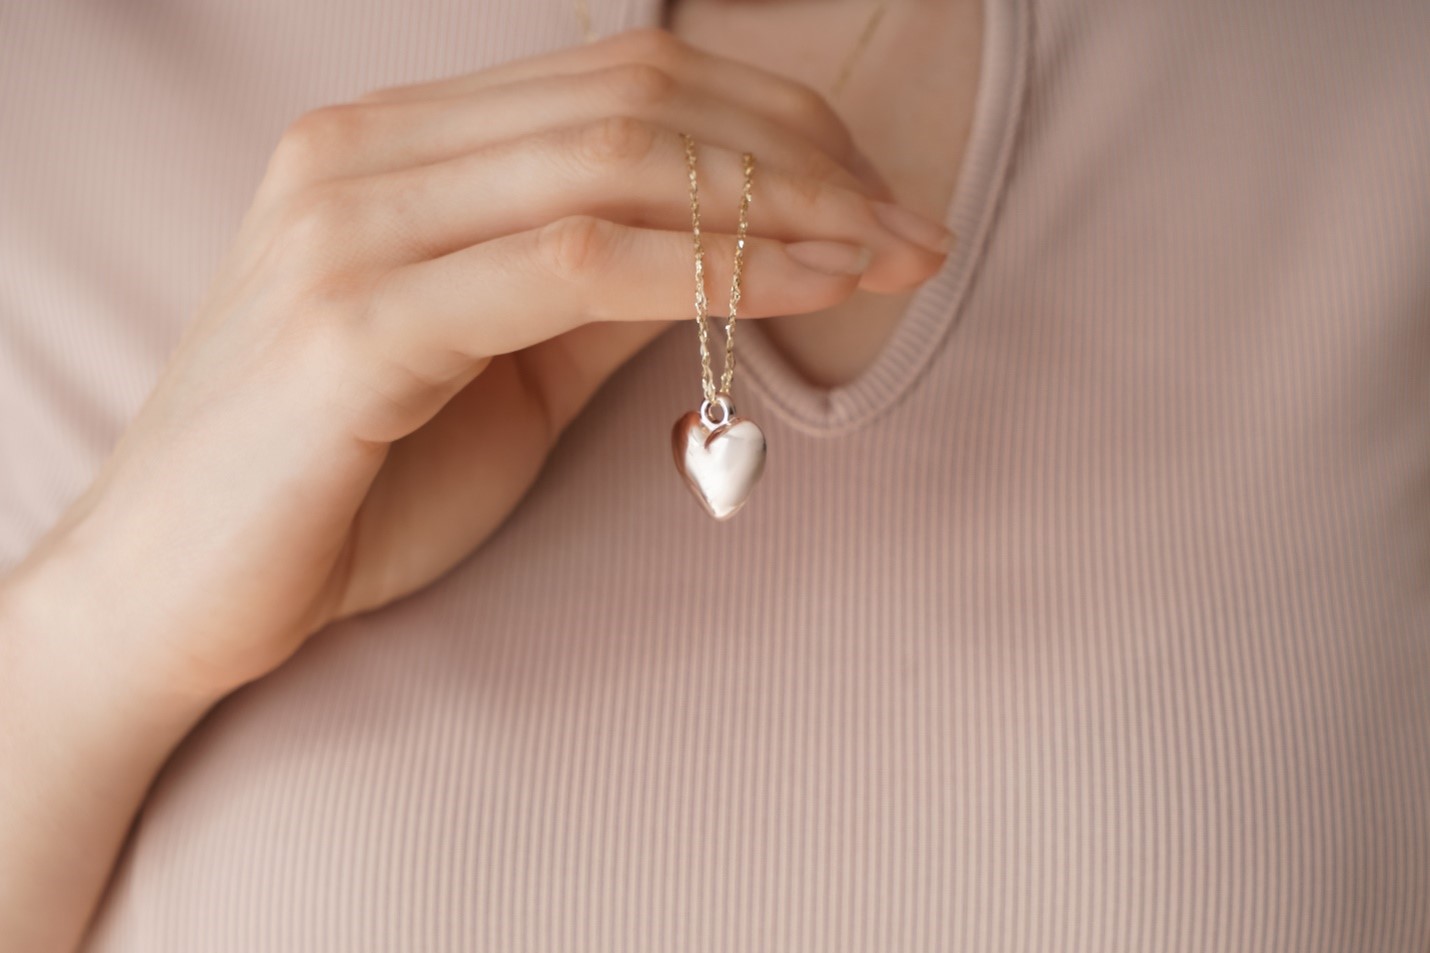 Every Tiffany Heart Silver Necklace Has a History Behind It